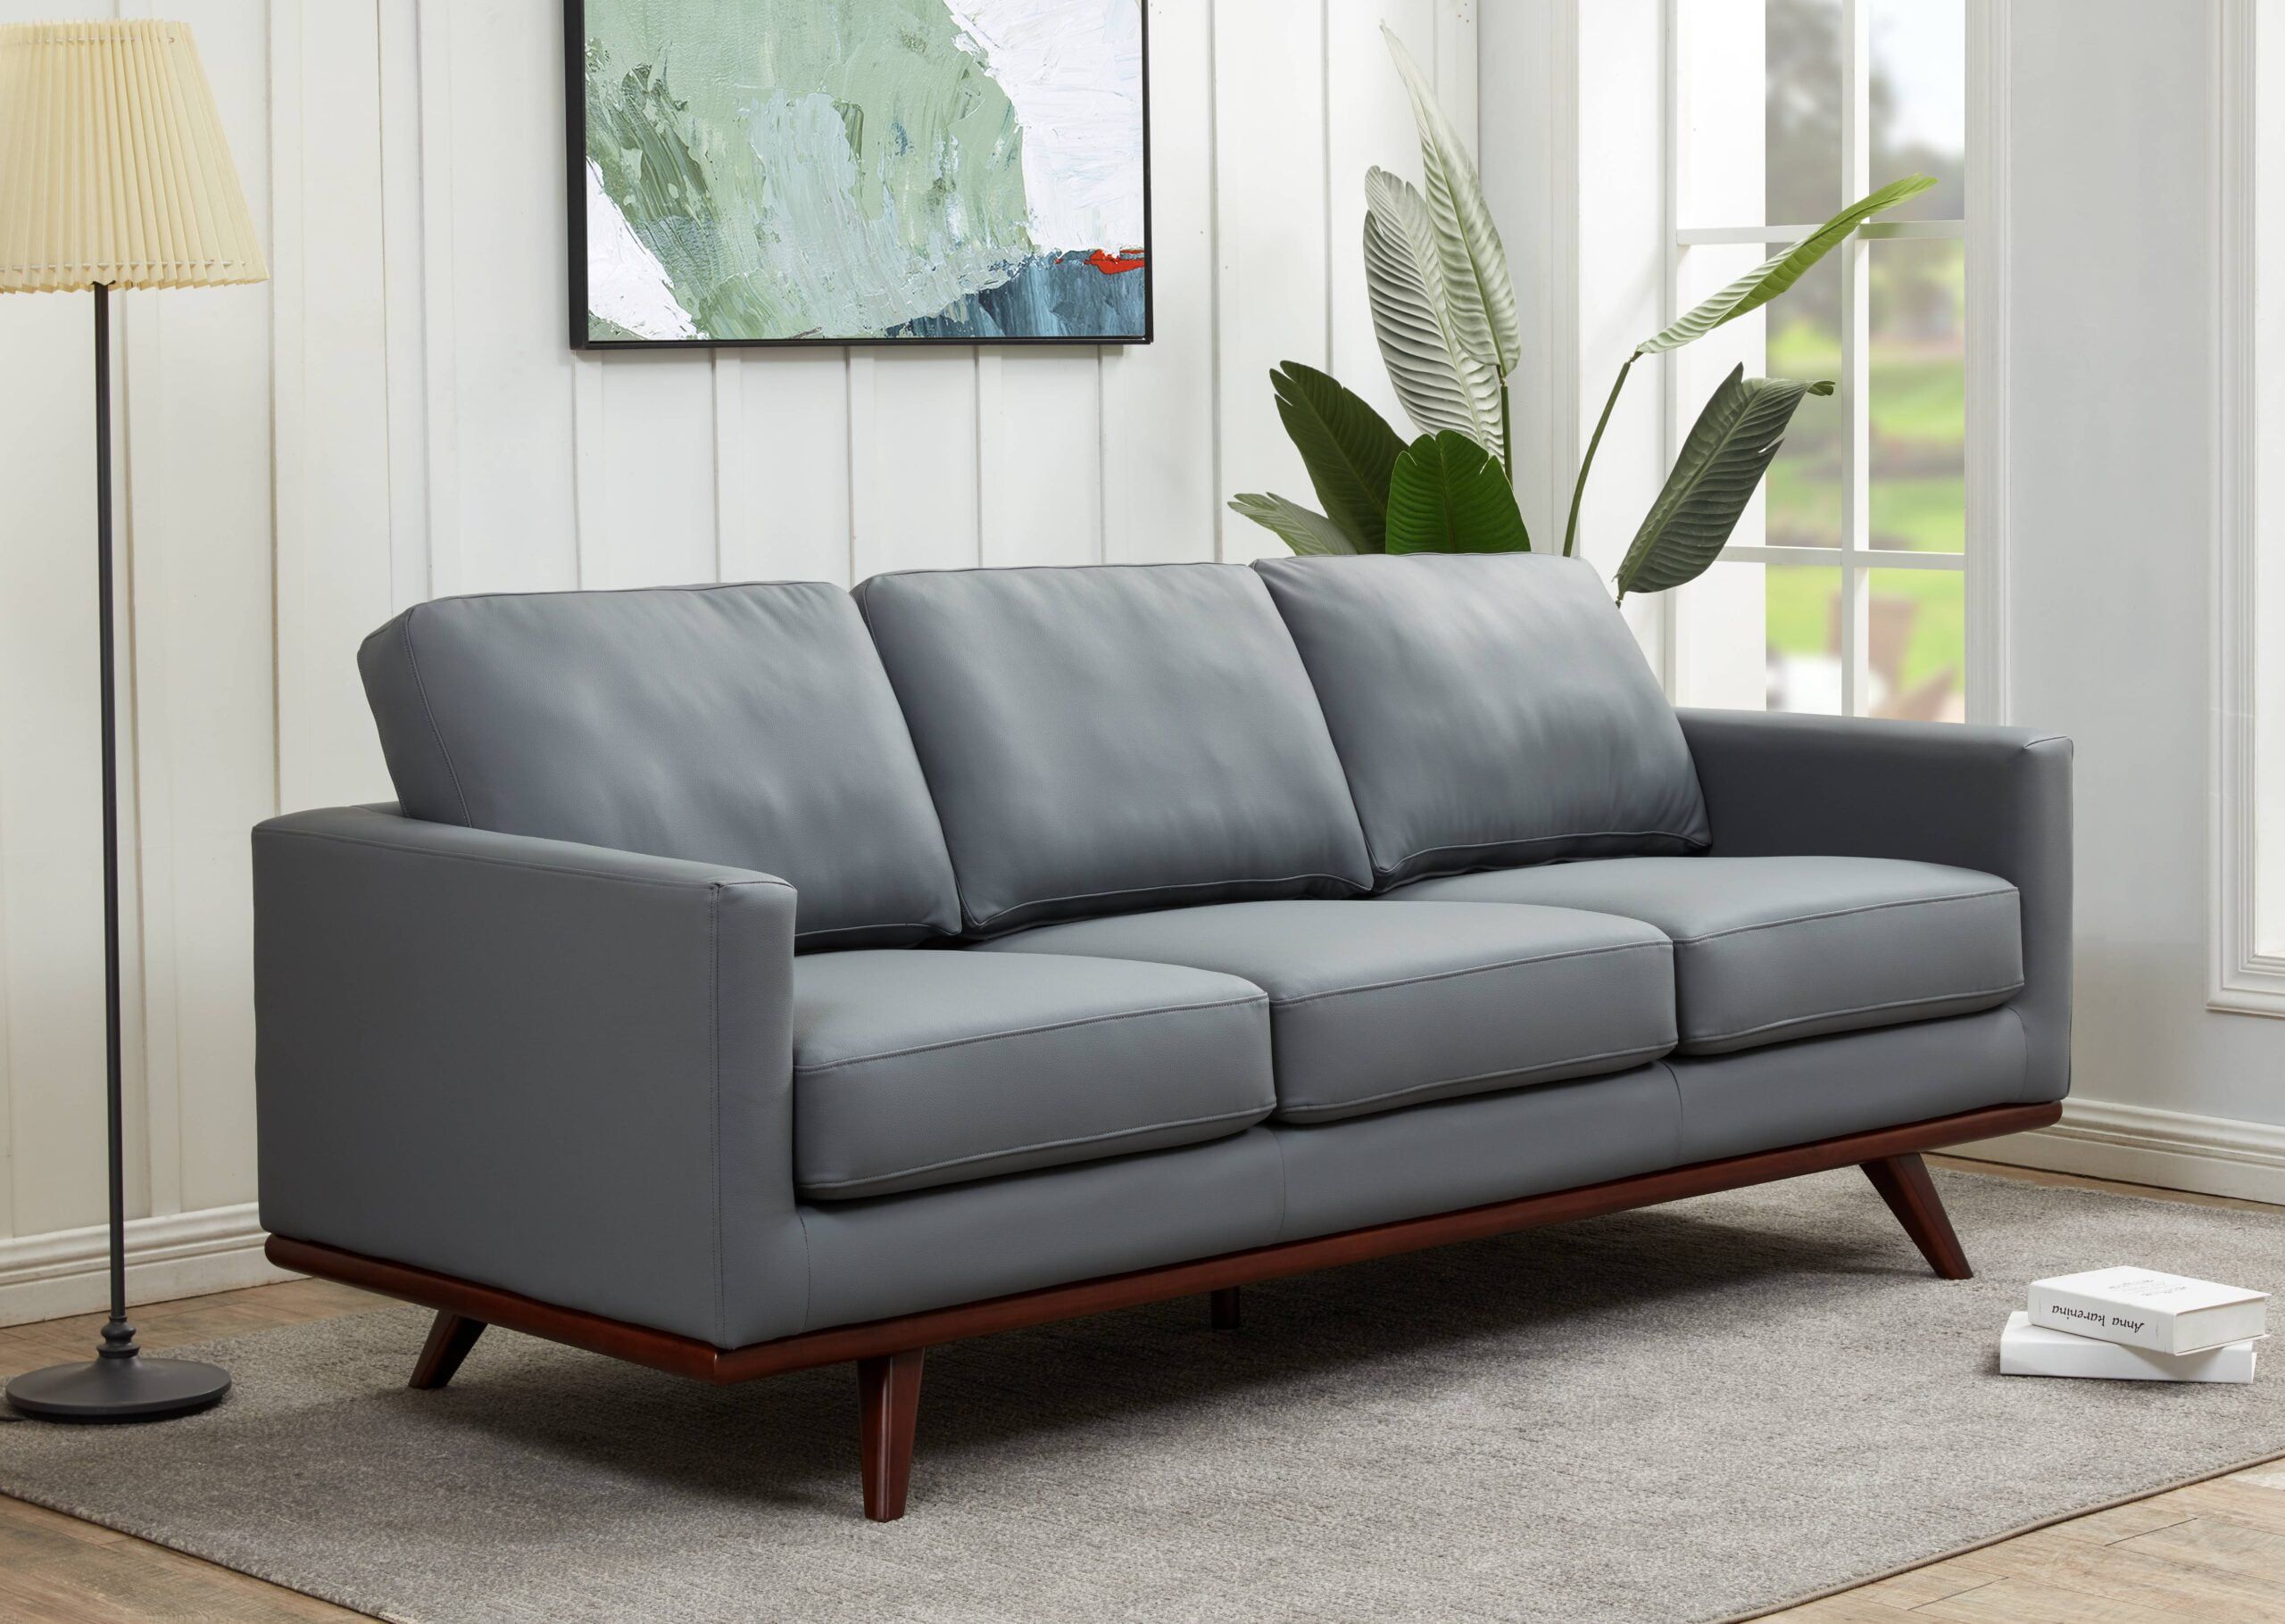 Leisuremod Chester Modern Leather 3 Seater Sofa With Birch Wood Base Mid  Century Living Room Couch (grey) – Walmart For Mid Century 3 Seat Couches (View 9 of 15)